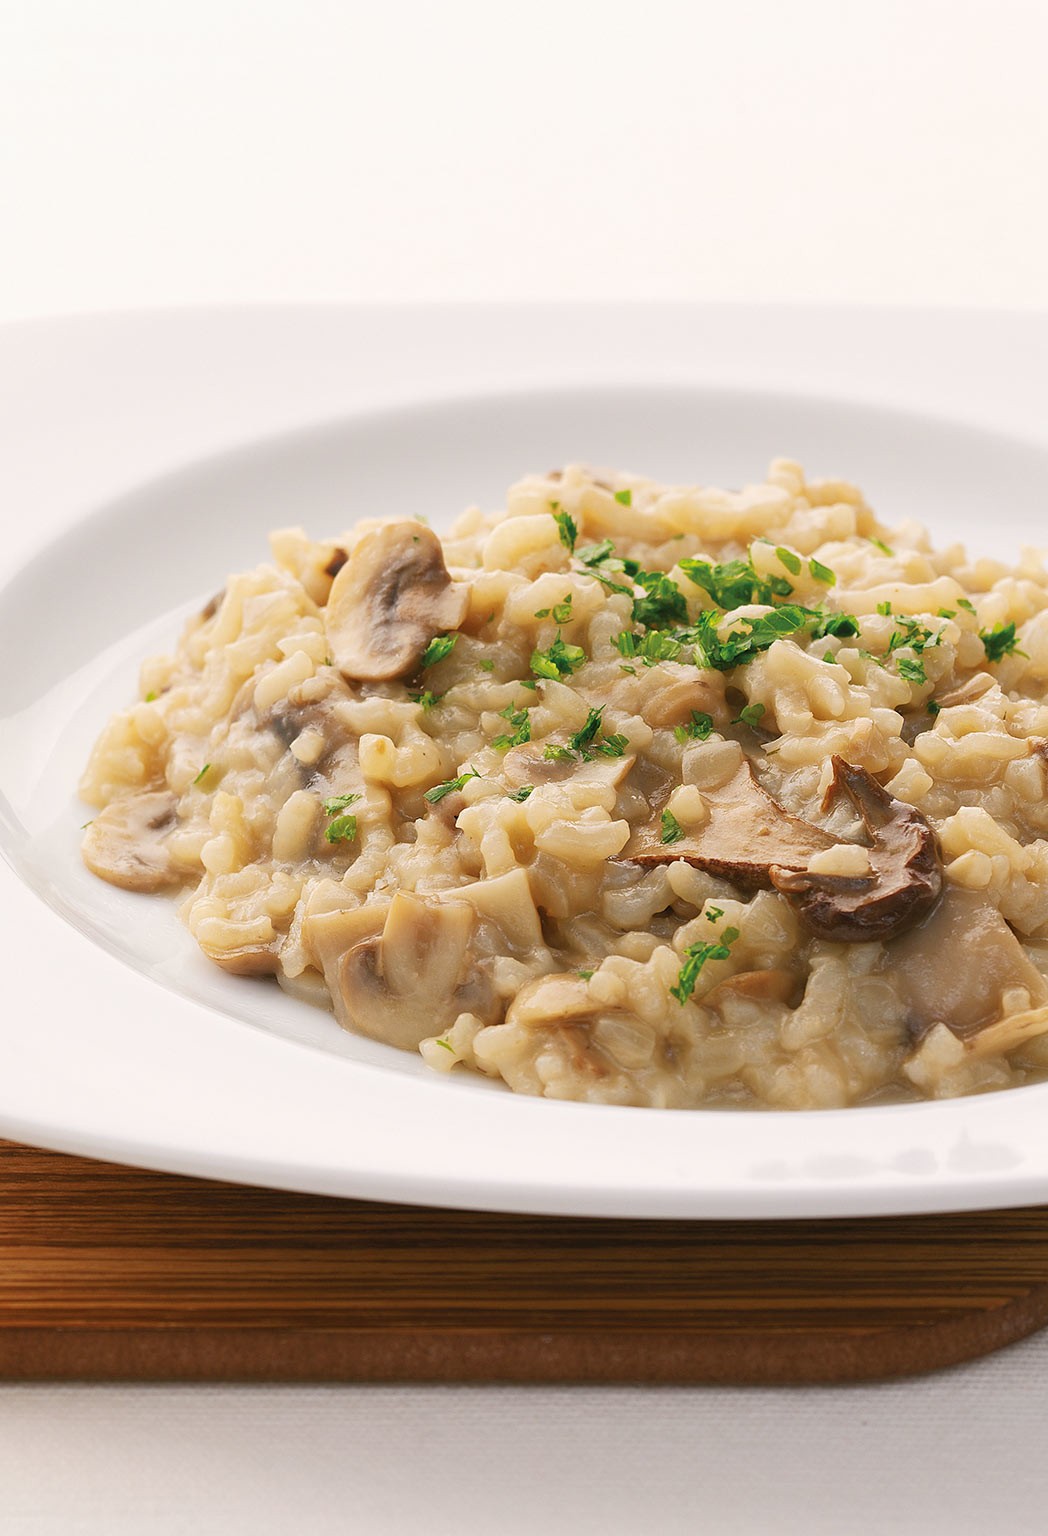 Mushroom and saffron risotto - Whirlpool Ireland - Welcome to your home ...